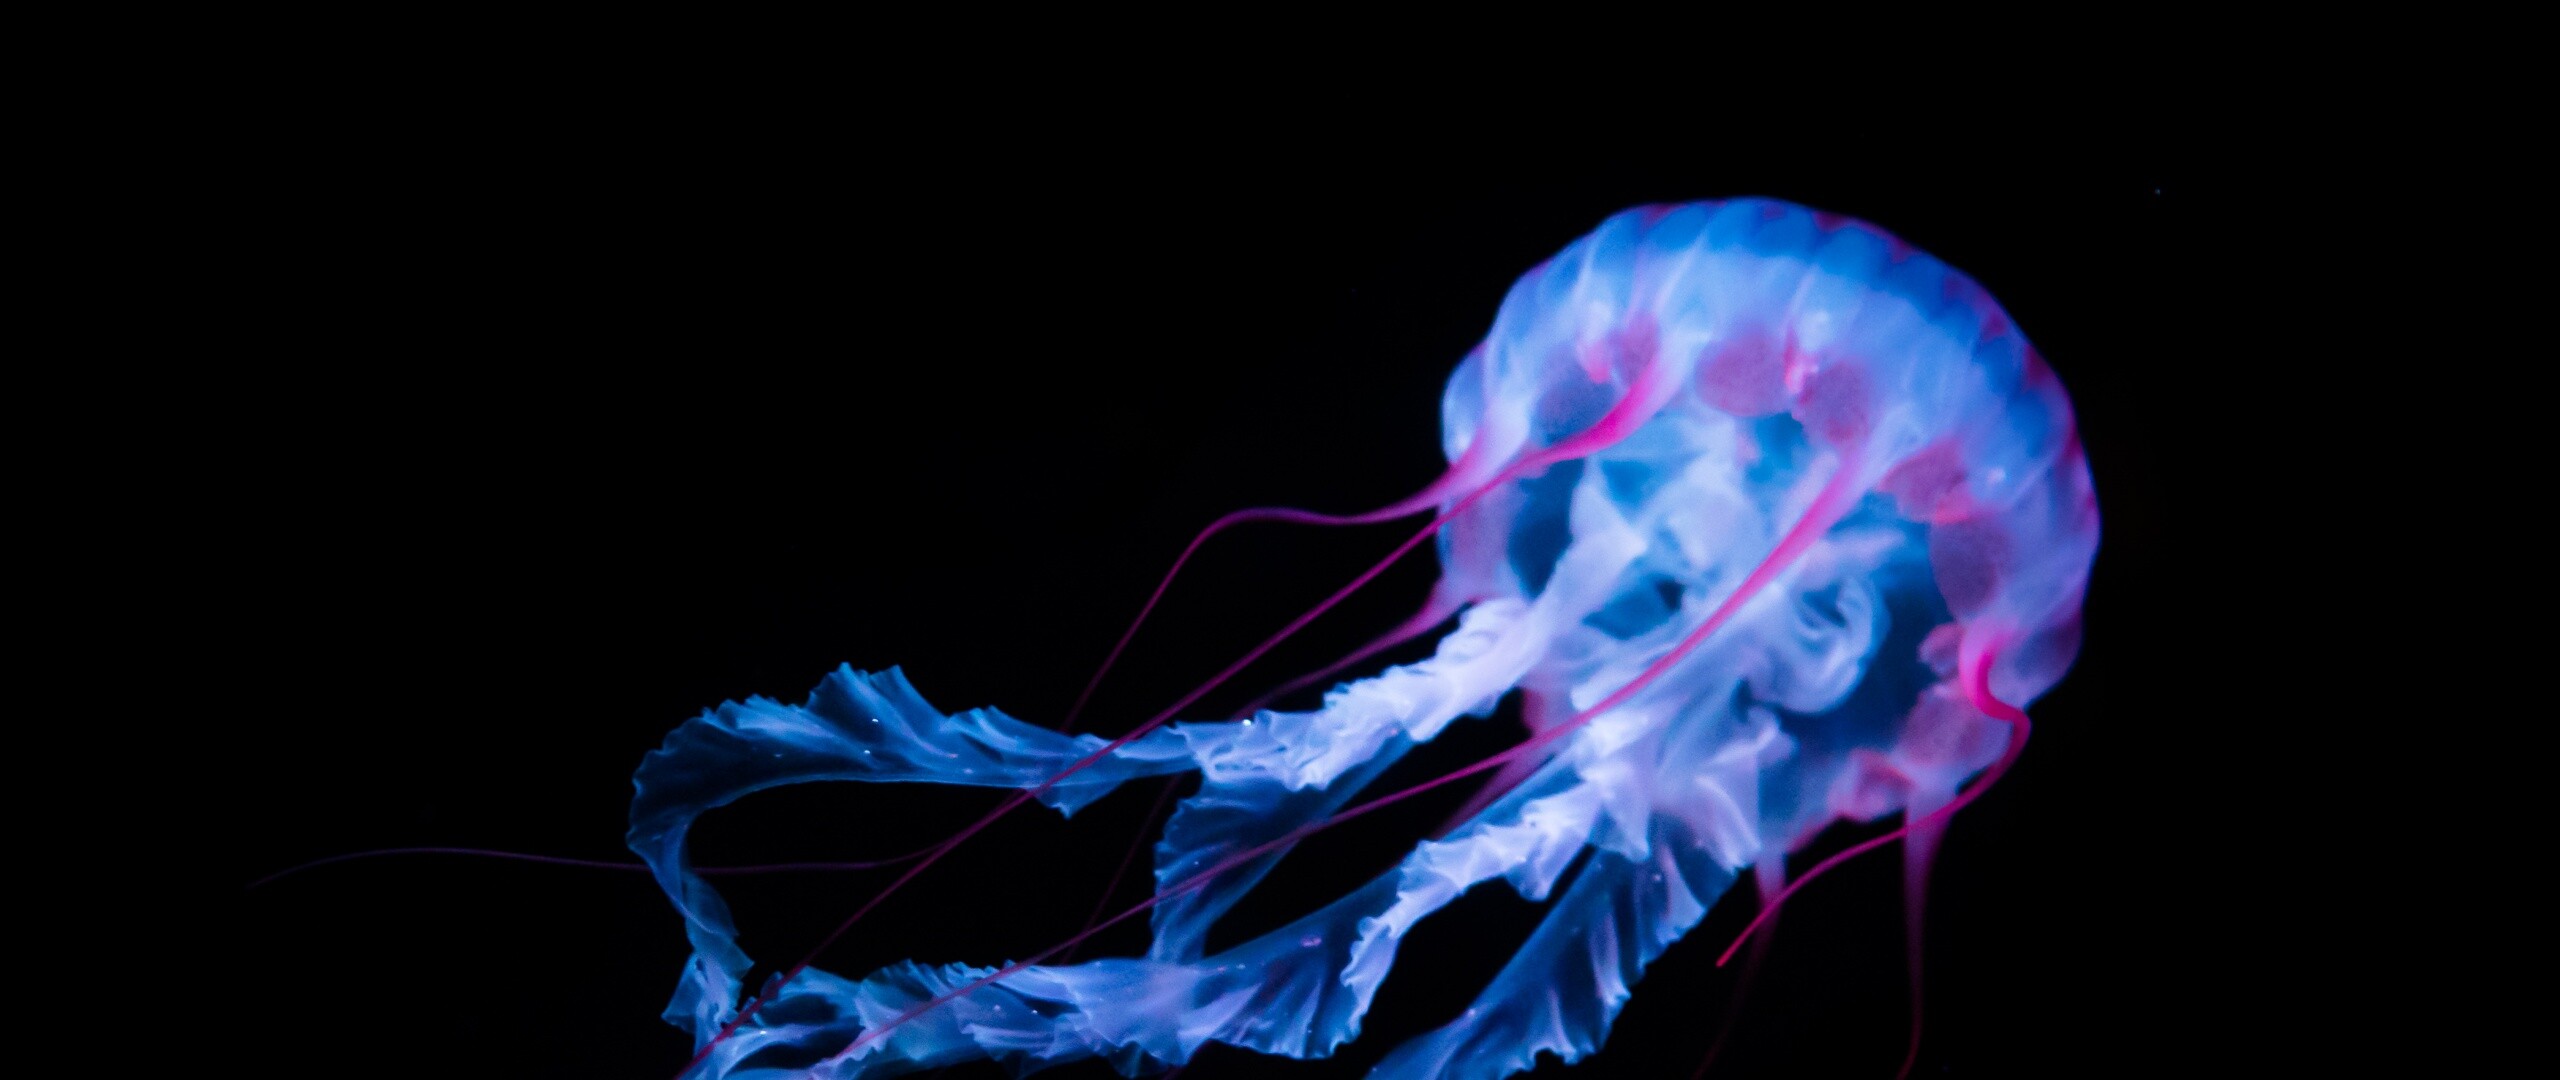 Glowing Jellyfish: Aurelia aurita, A single blue translucent disk in the center of their bell, Sea jelly. 2560x1080 Dual Screen Background.